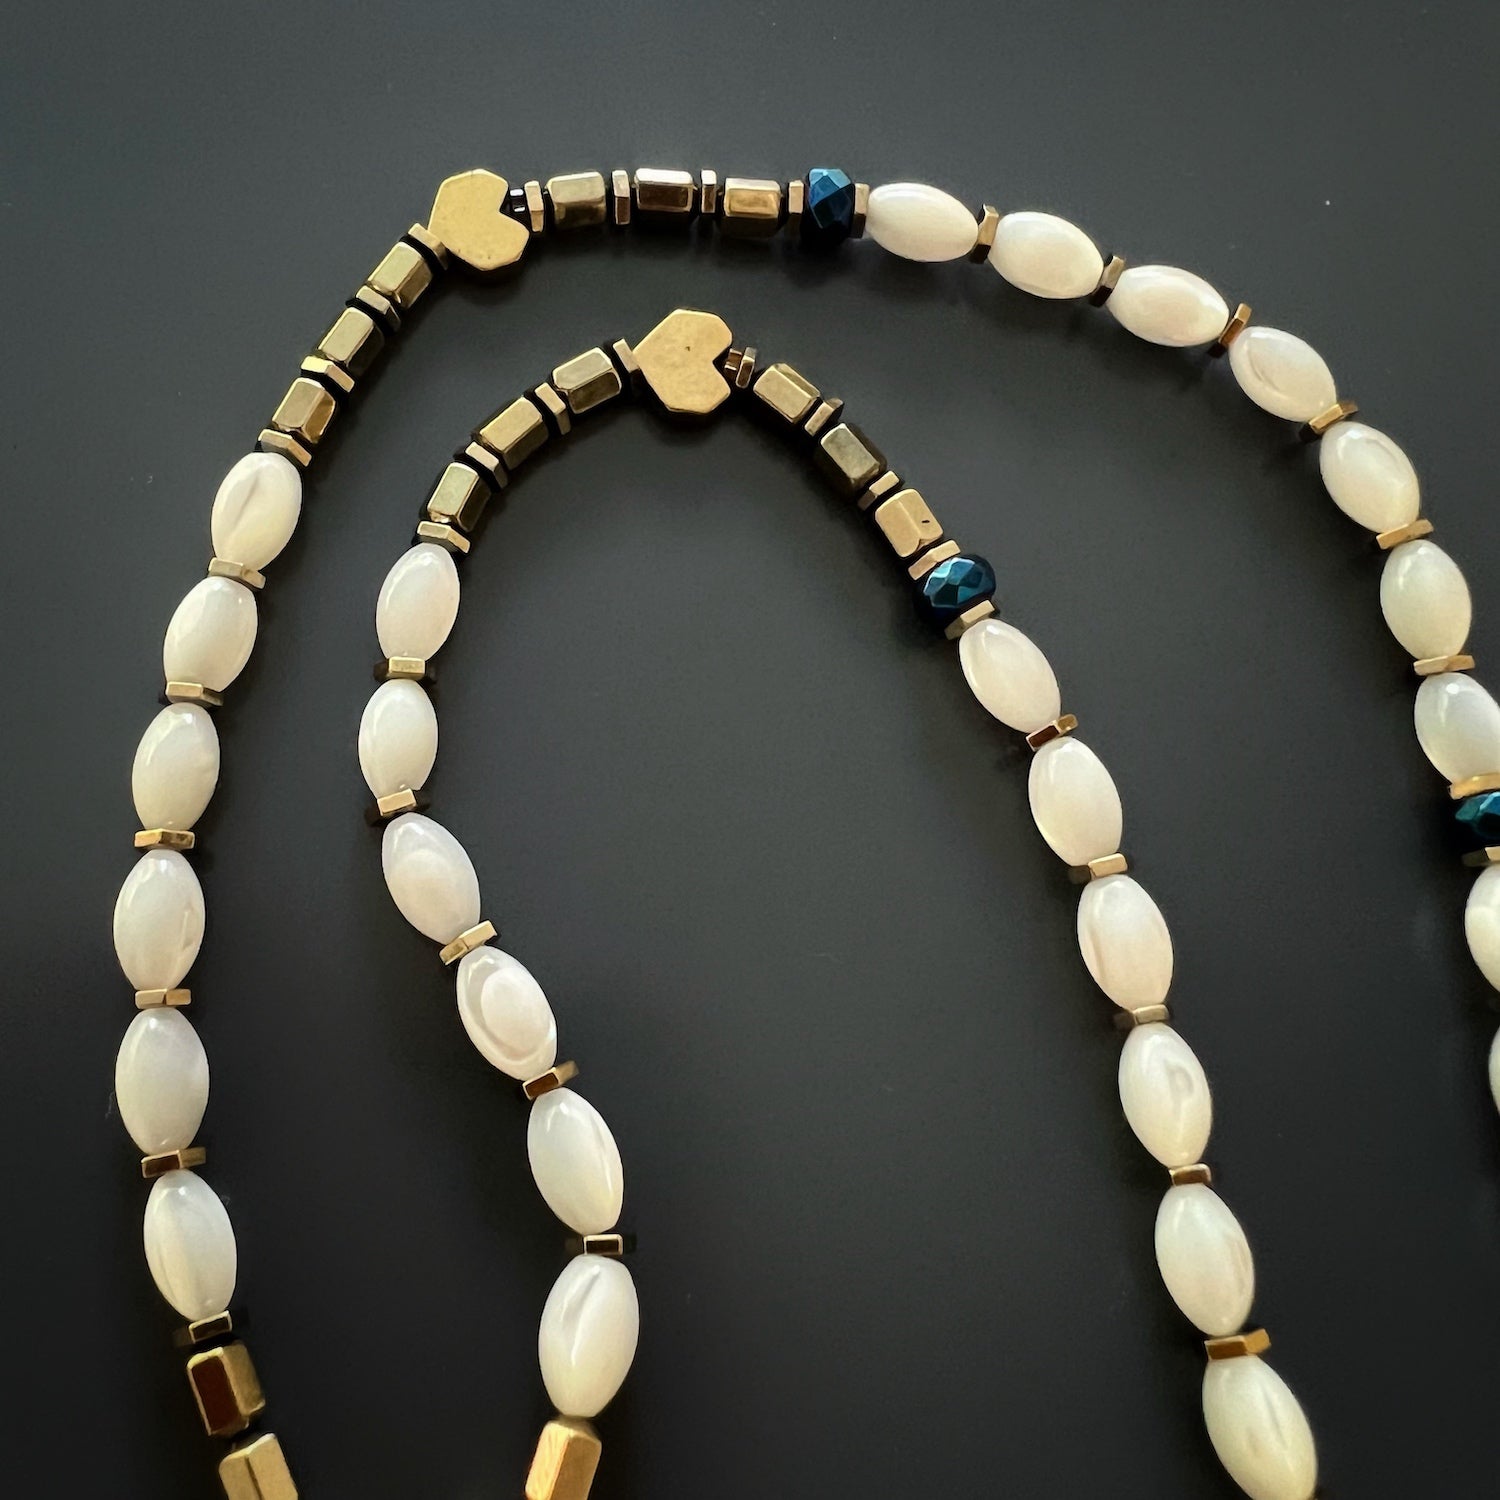 Close-up of the Mother of Pearl beads on the Pure Love Mom Necklace, showcasing their iridescent quality and natural elegance.